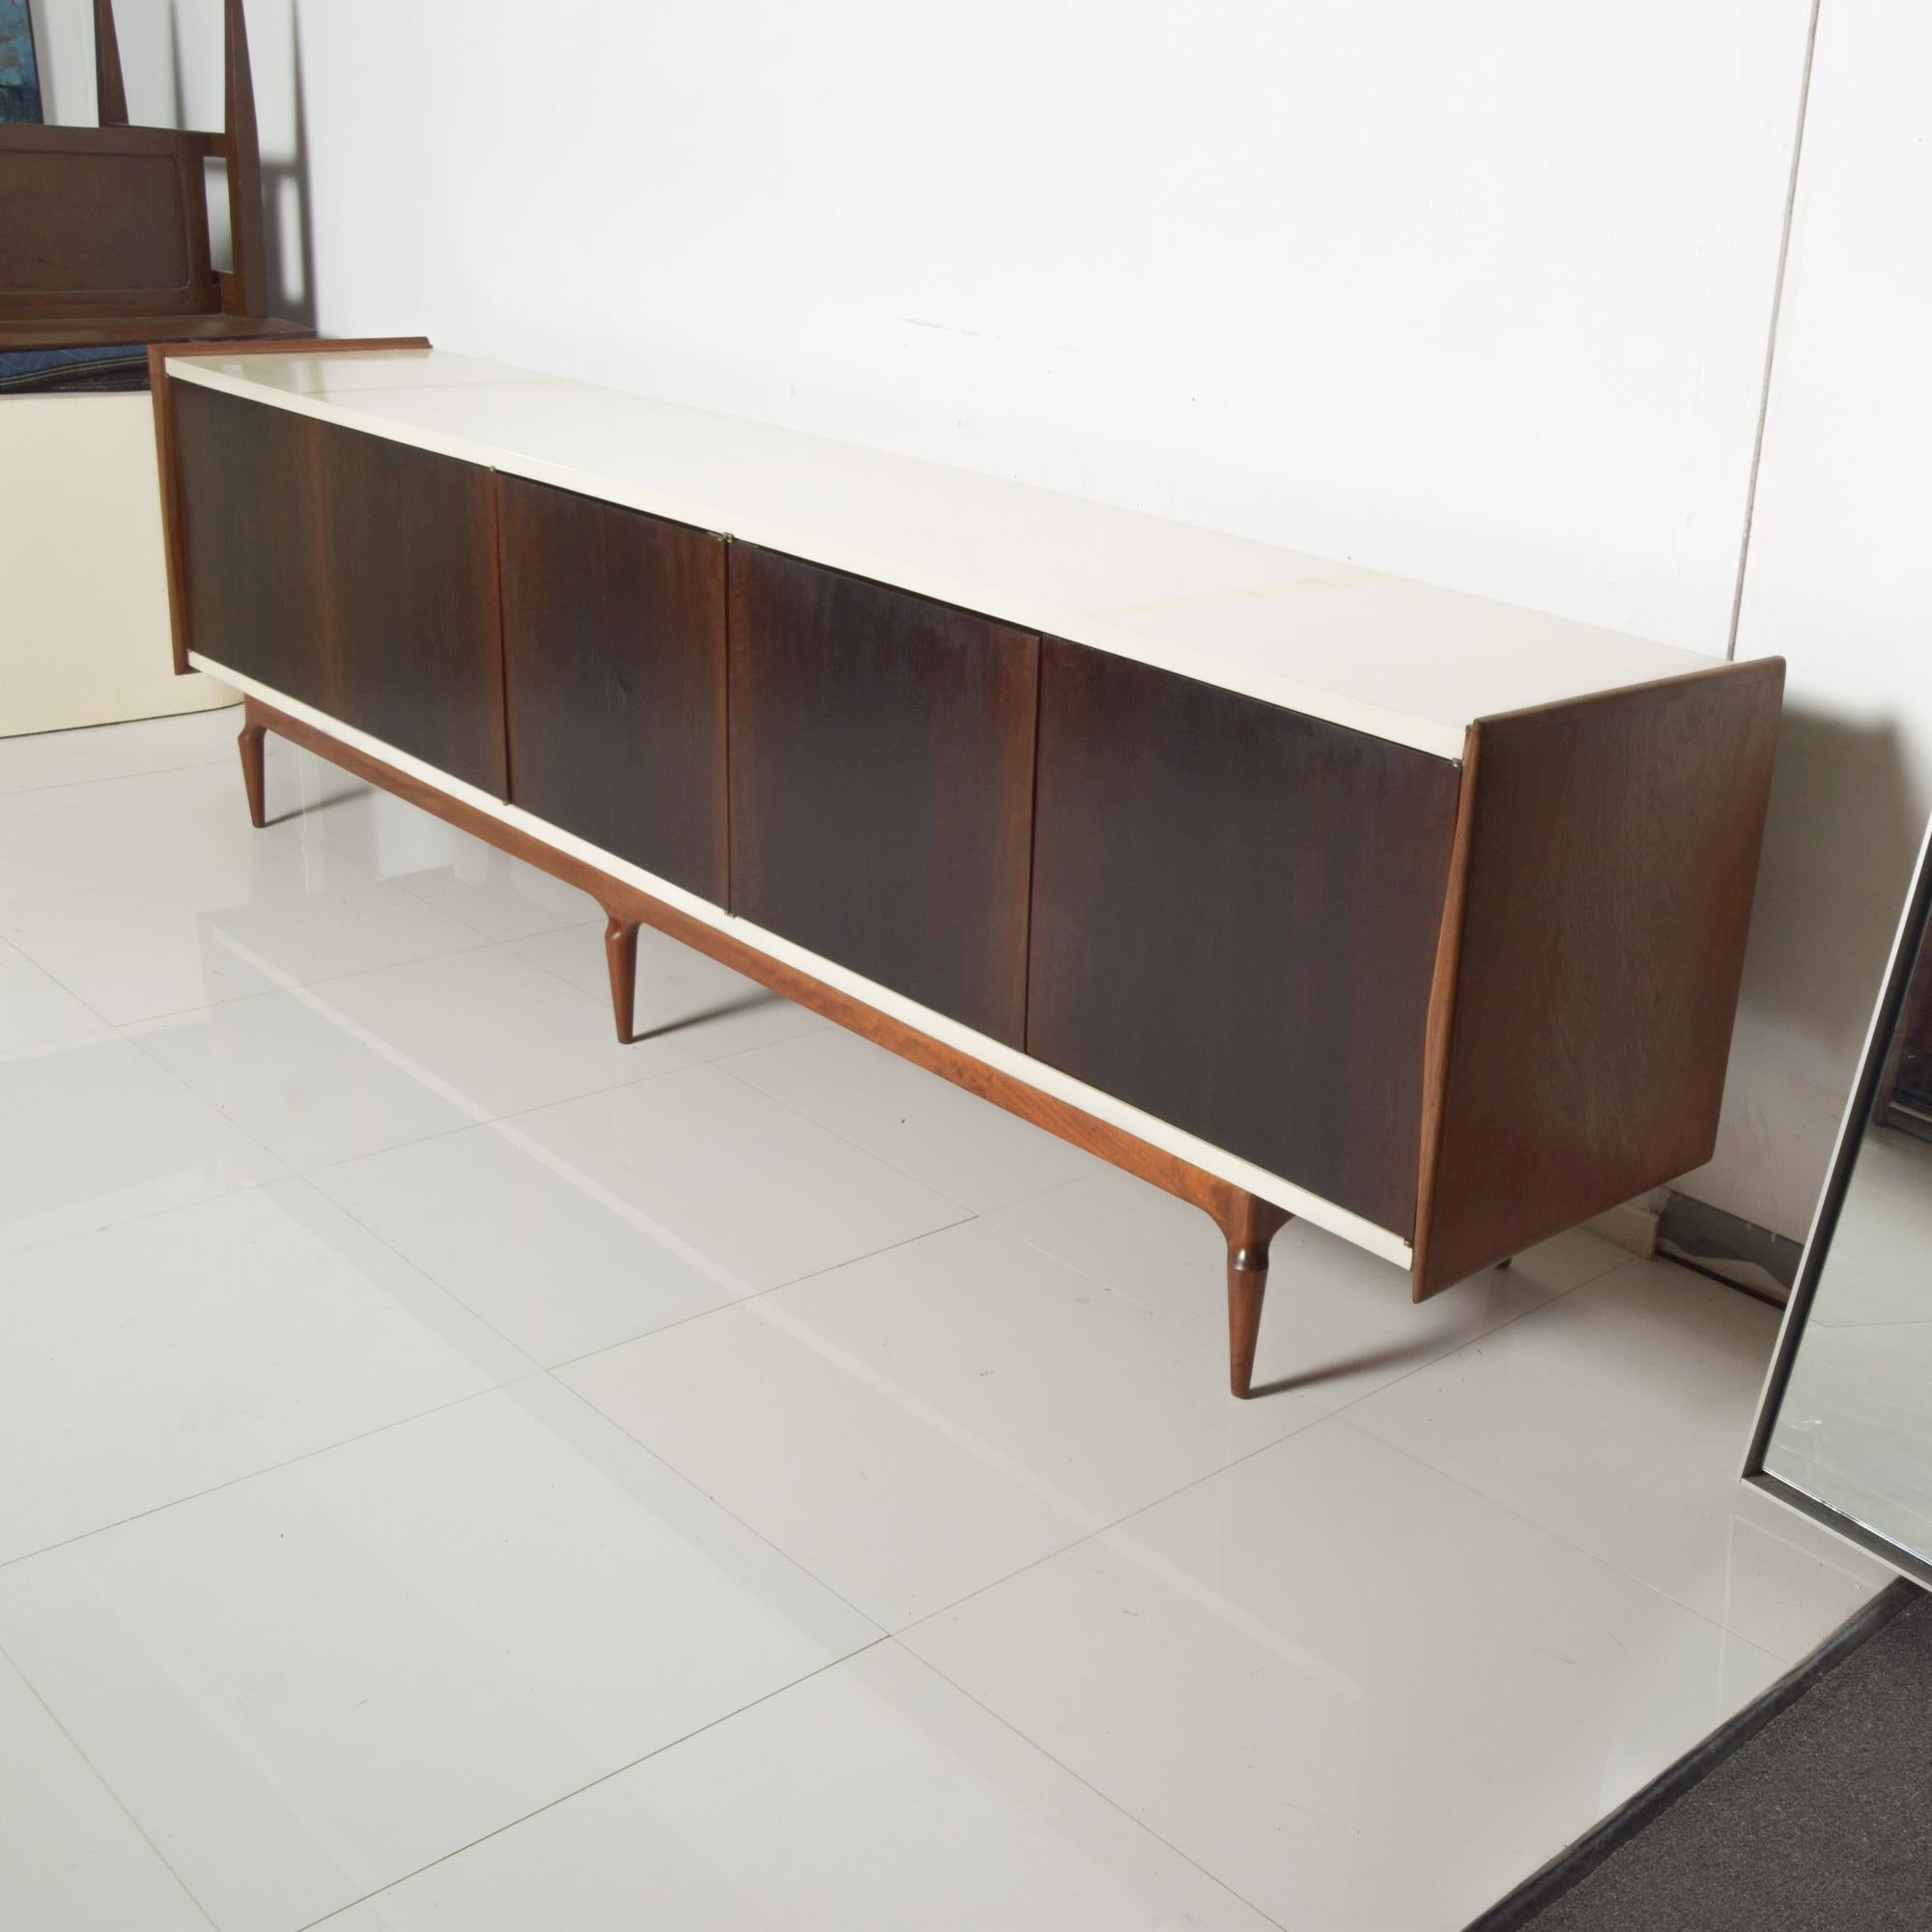 Mid-20th Century 1960s Magnificently Long Credenza Two Tone Lacquer & Wood Monterrey, Mexico For Sale